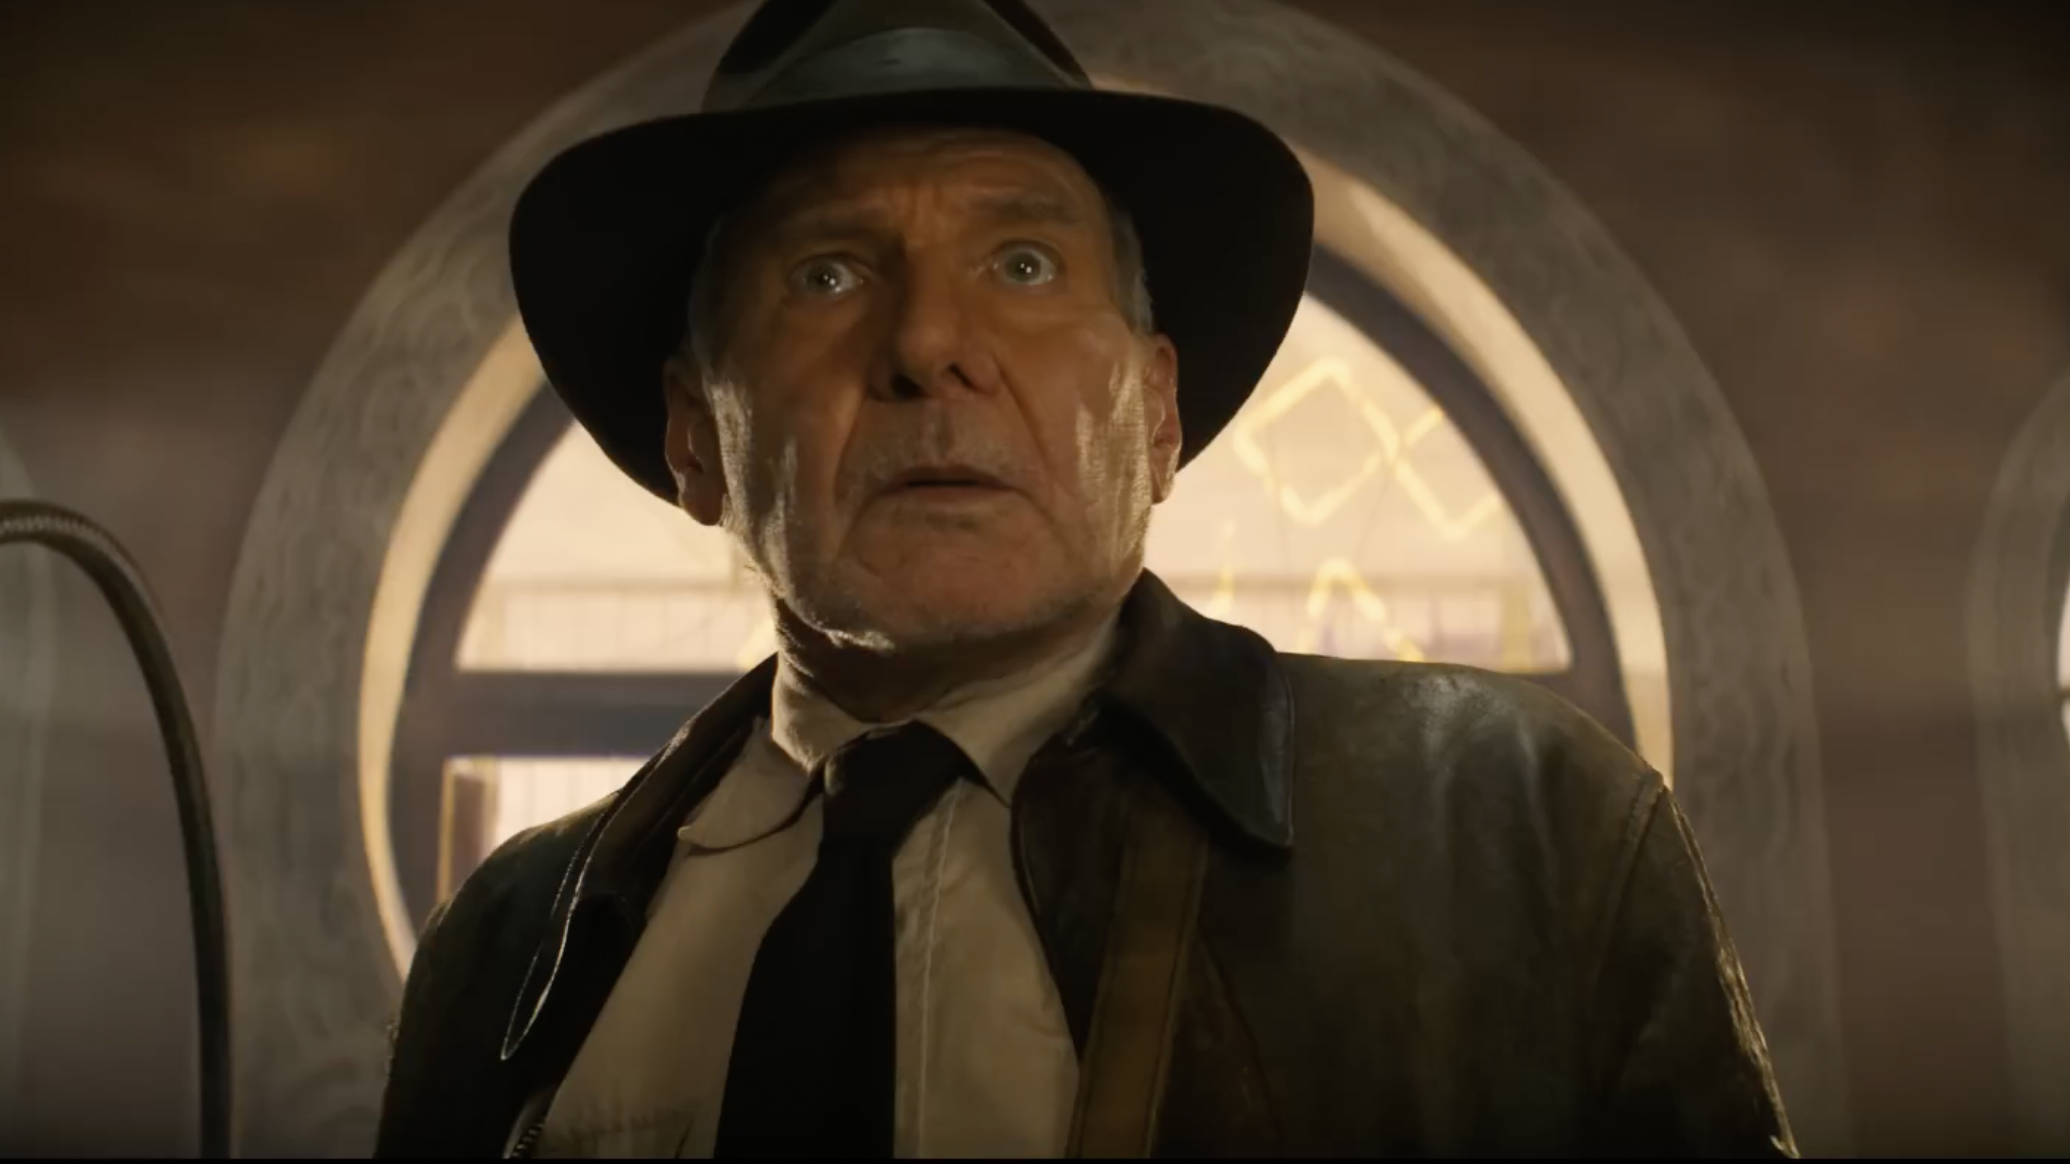 Indiana Jones 5 has set an unwanted record ahead of release